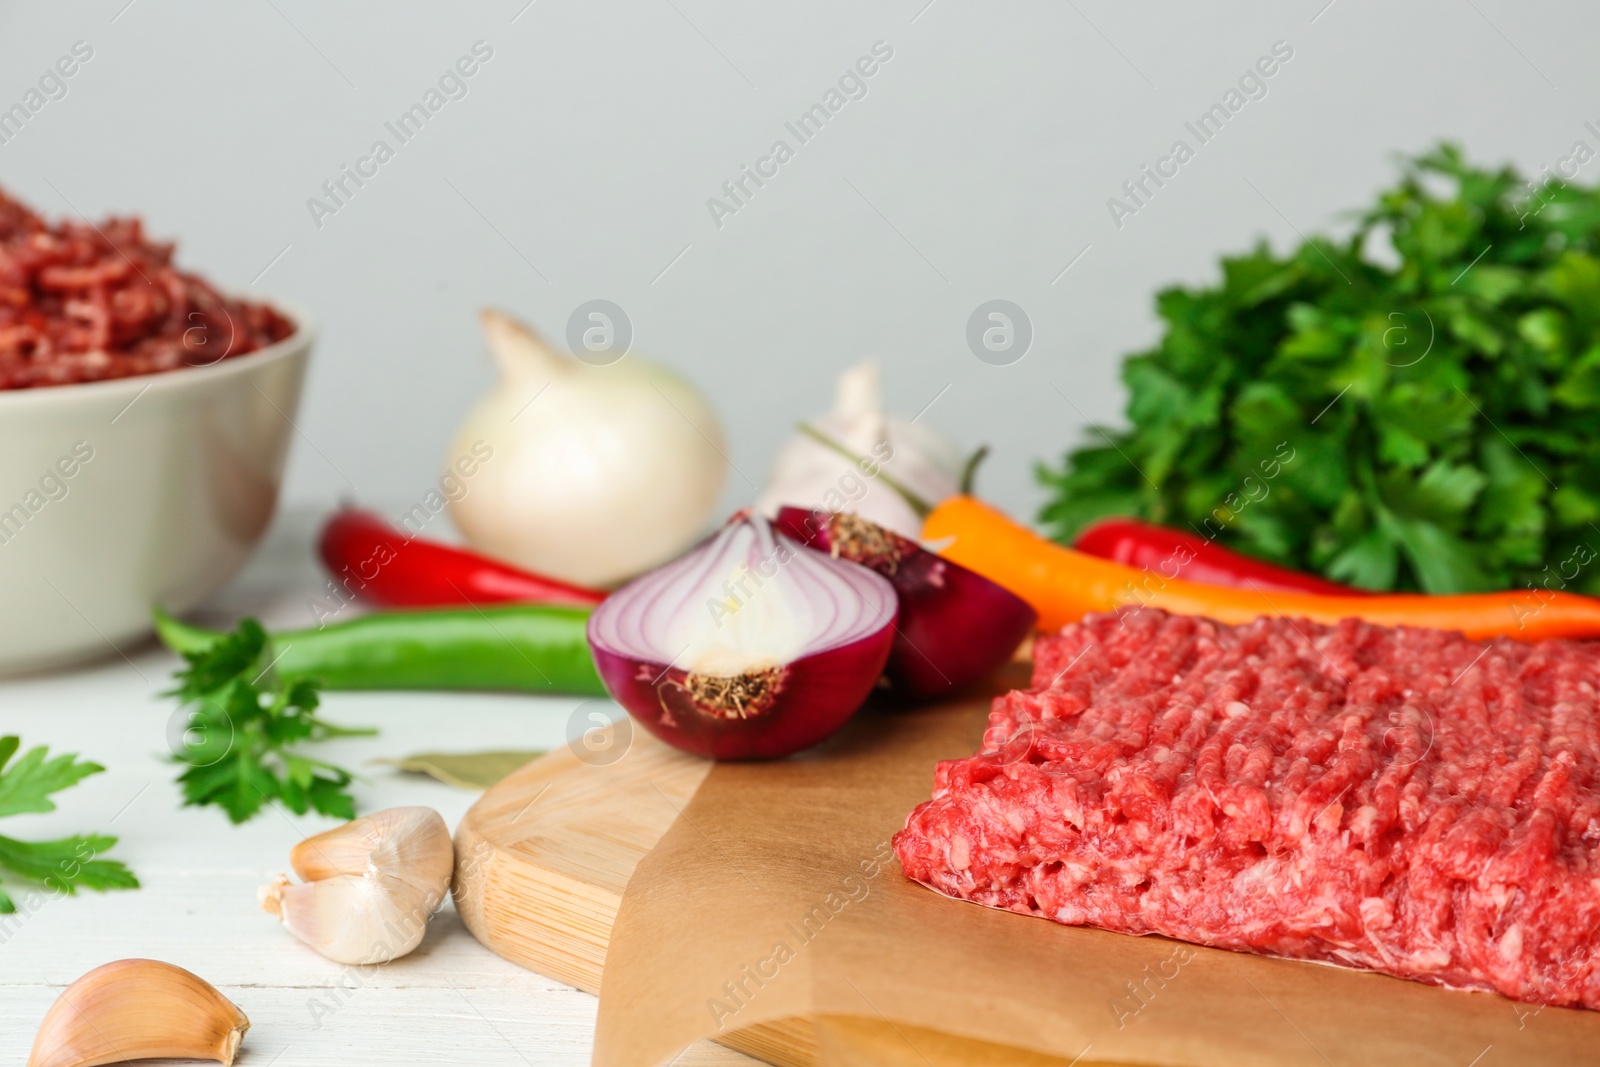 Photo of Fresh raw minced meat and vegetables on table